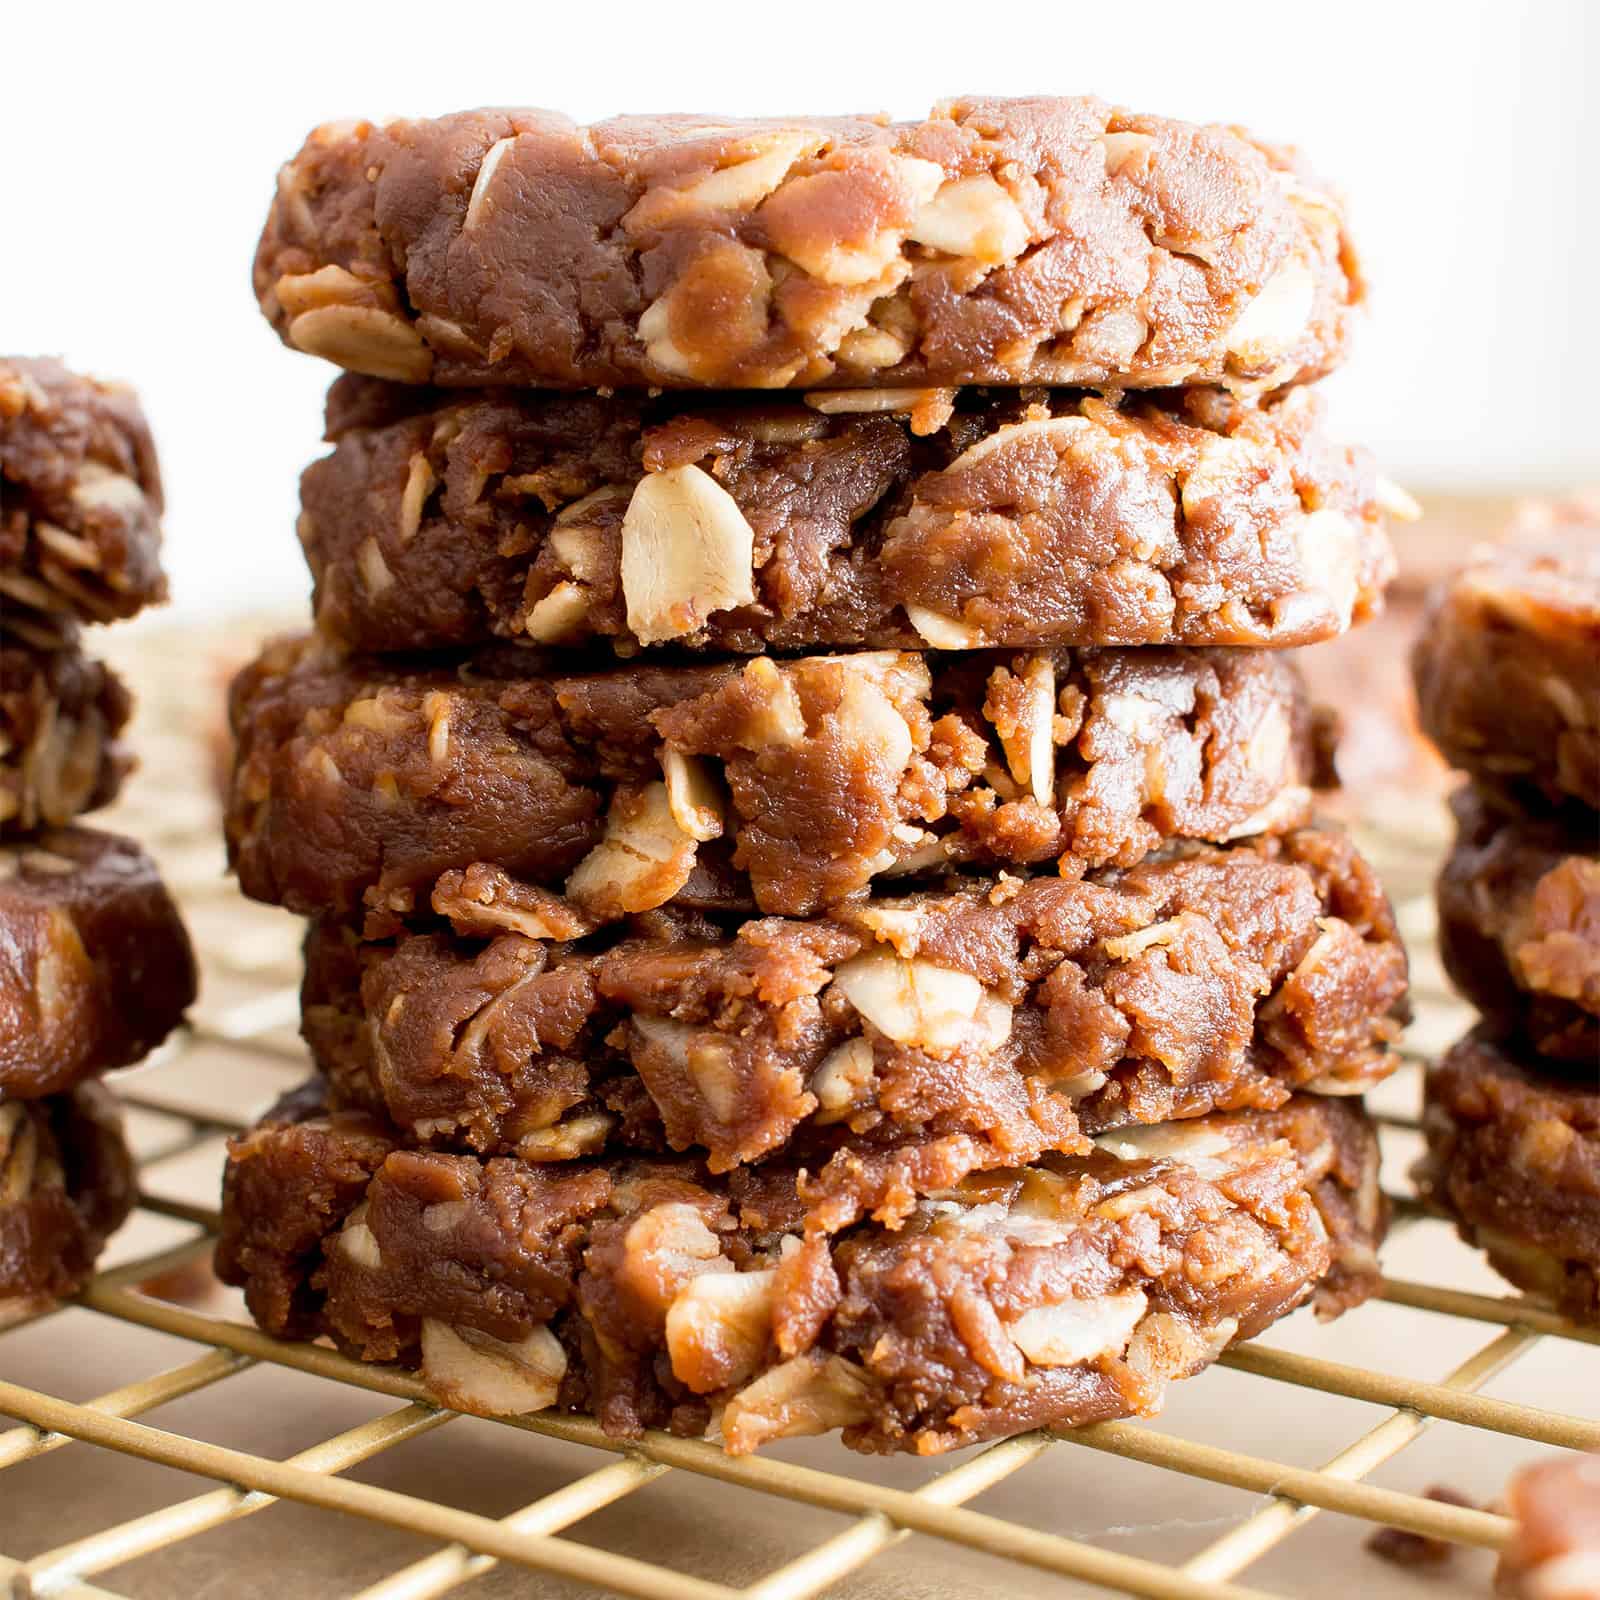 4 Ingredient No Bake Chocolate Peanut Butter Oatmeal Cookies (Vegan, Gluten-Free, Protein-Packed)